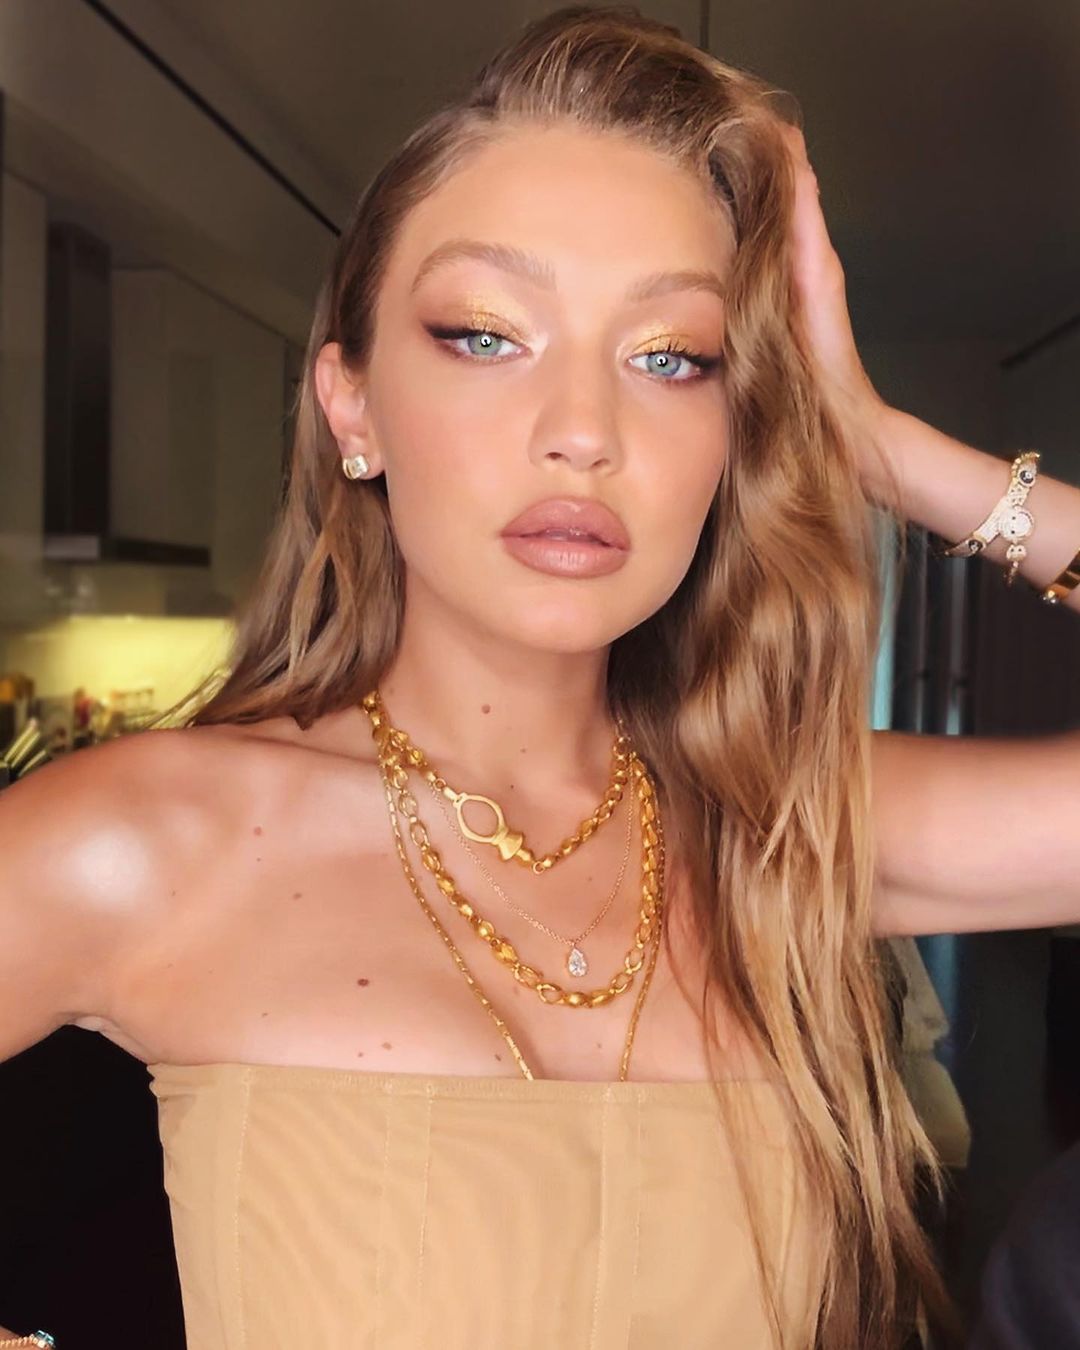 Photos n°2 : Sports Illustrated Swimsuit Set Instagram on Fire With a Throwback Look at Gigi Hadid!